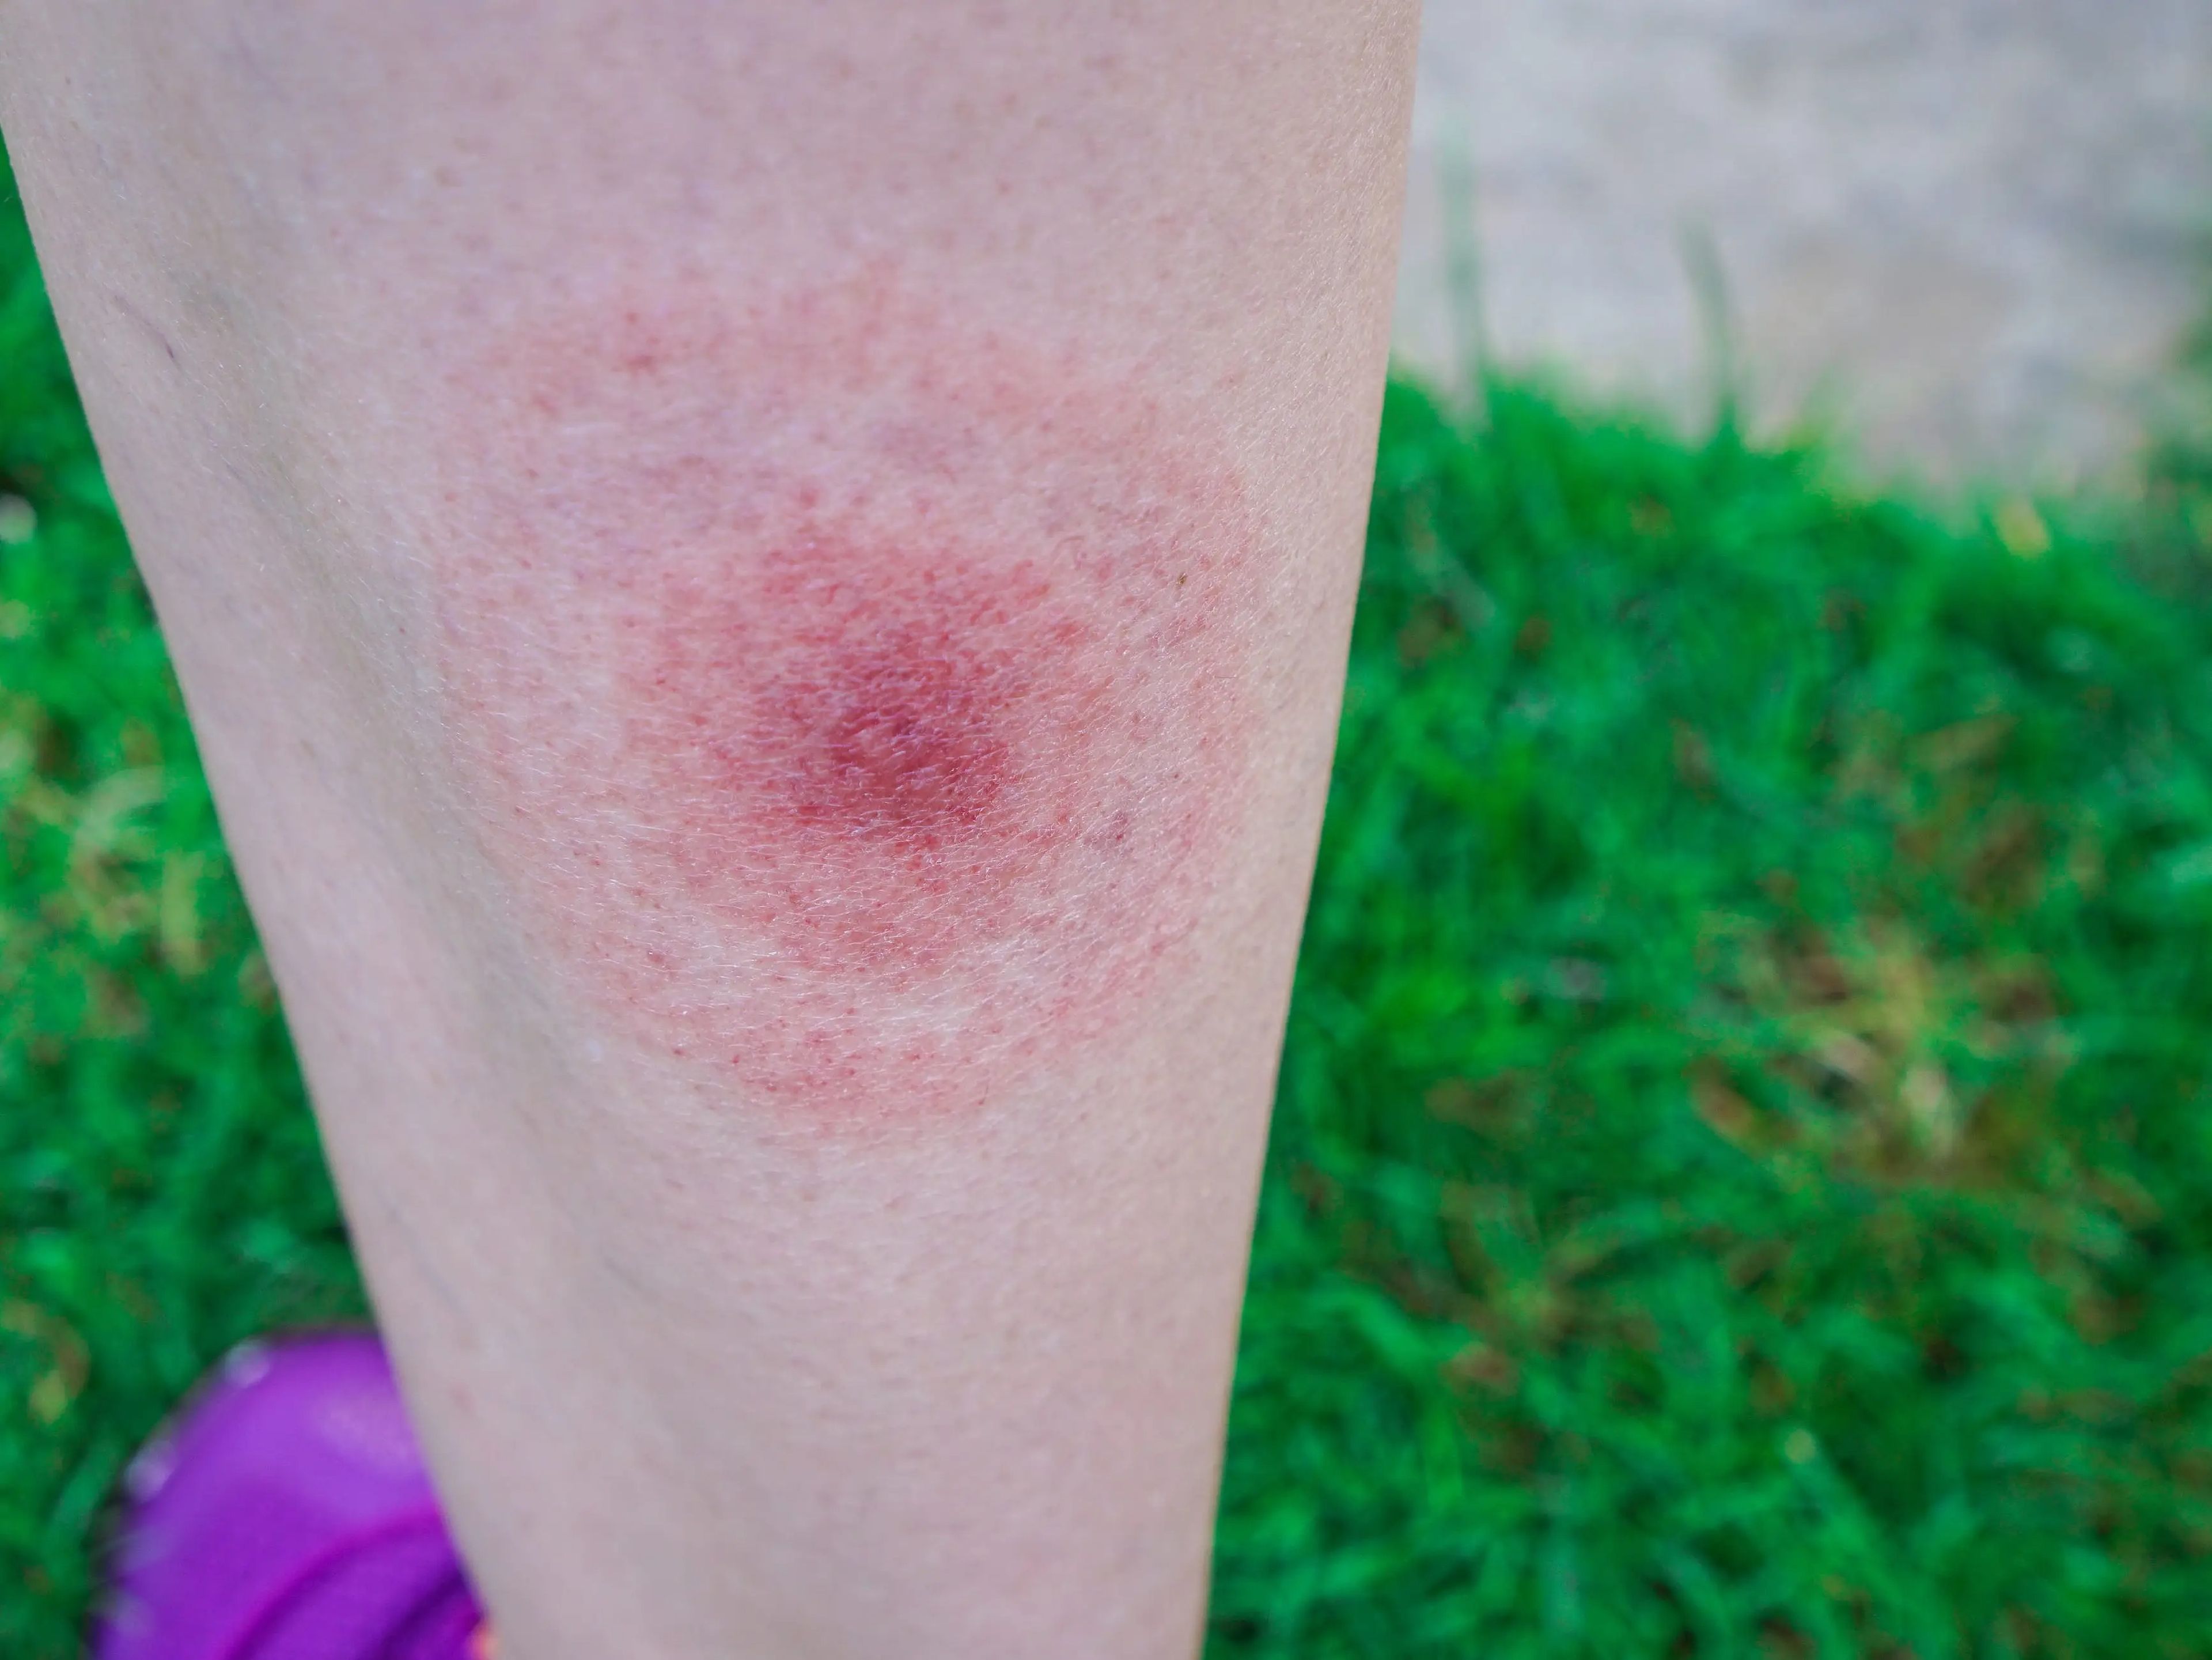 A common bull's-eye rash on the legs of people with Lyme disease.